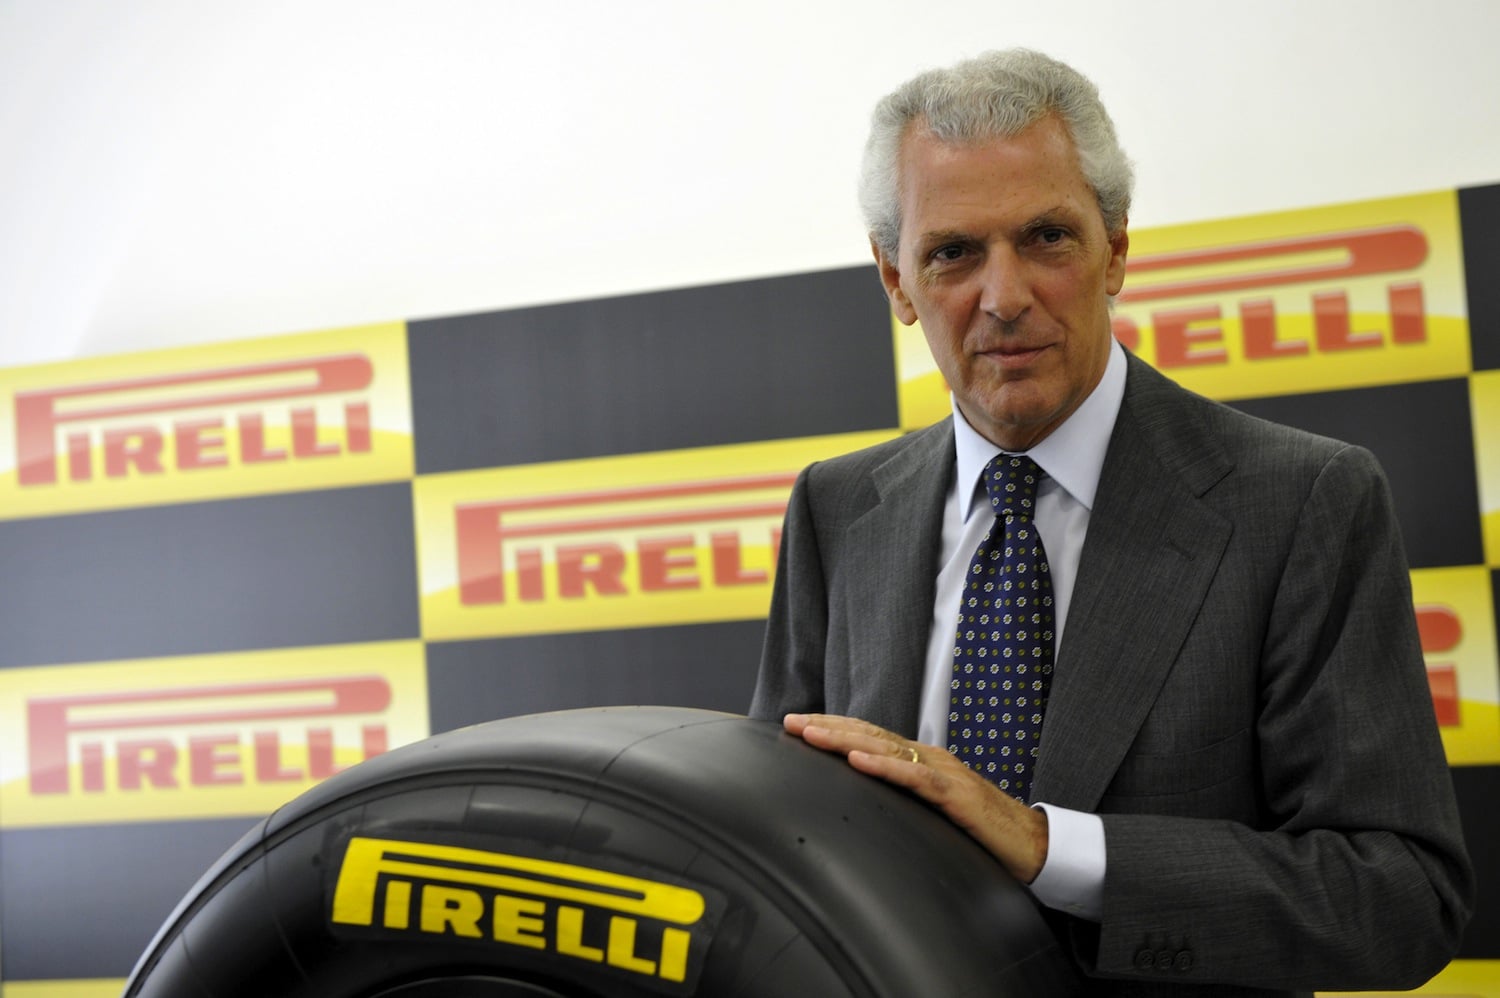 chairman of the Pirelli Group, Marco Tronchetti Provera poses with a Formula One tyre in Milan on June 24, 2010. Italian tyre manufacturer Pirelli has clinched an exclusive three-year deal to supply tyres to Formula One teams from next year, the sport's governing body FIA announced. AFP PHOTO / GIUSEPPE CACACE